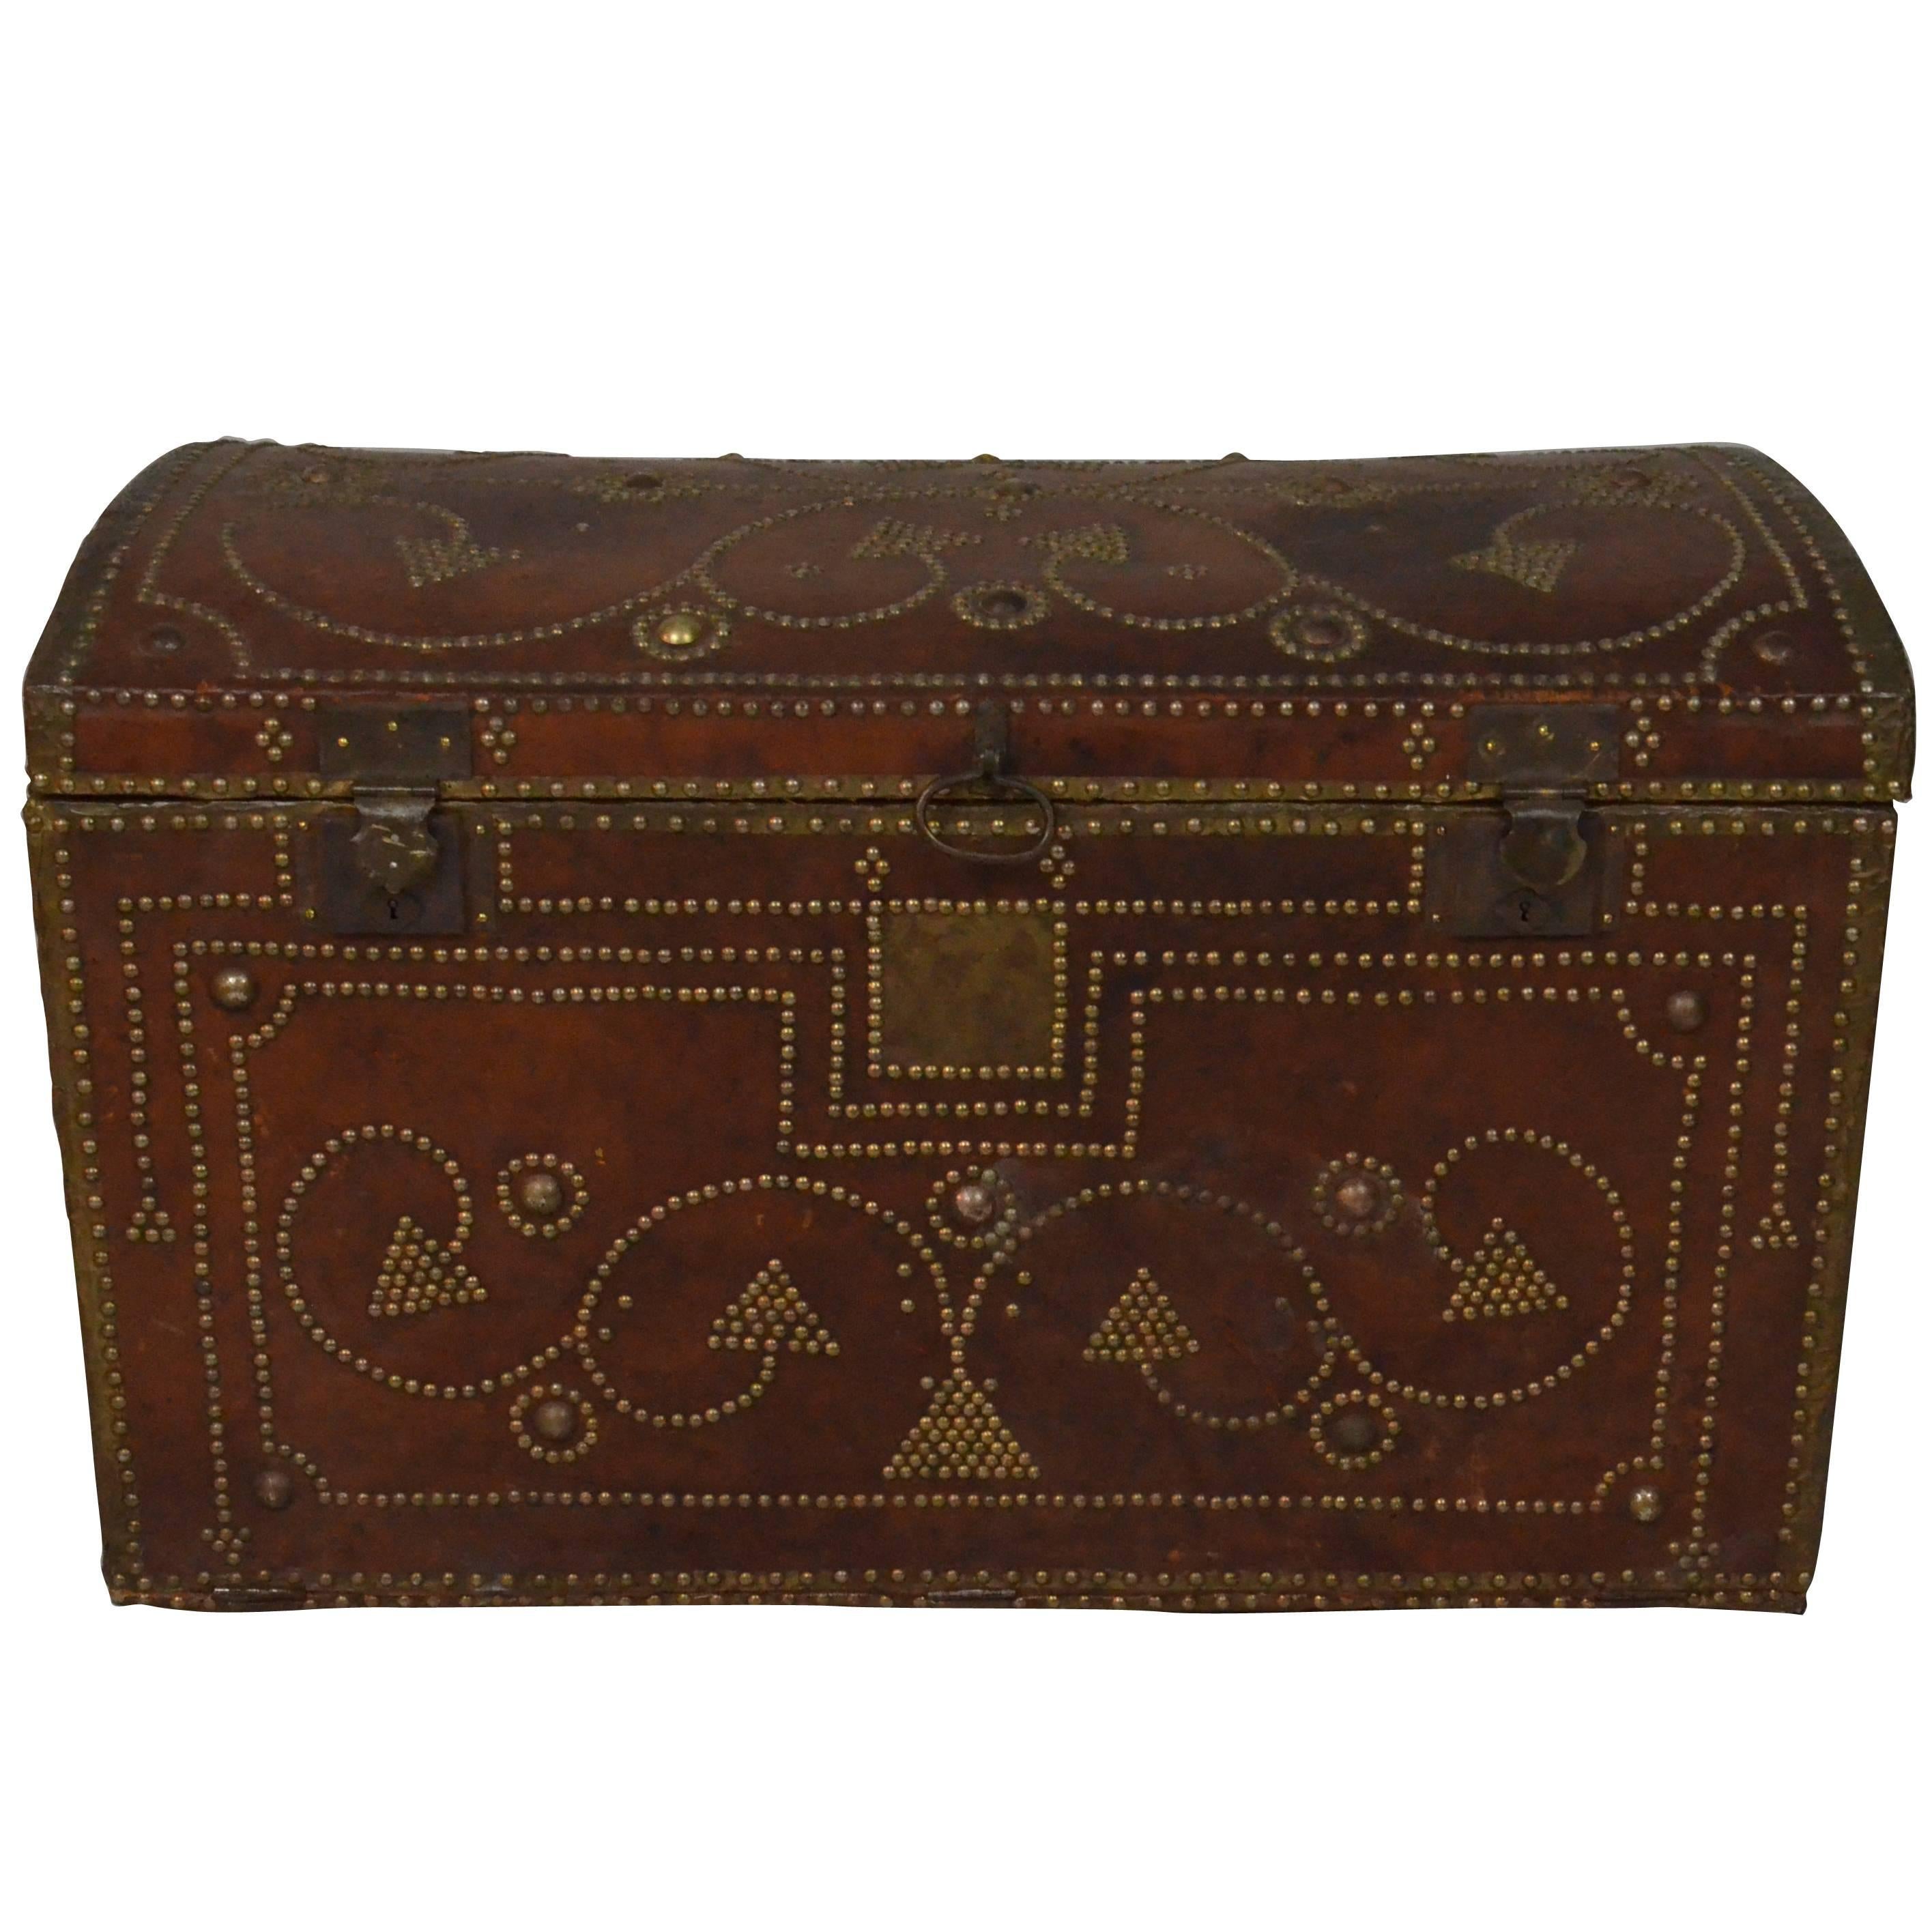 Early 20th Century Italian leather and brass studs Trunk 